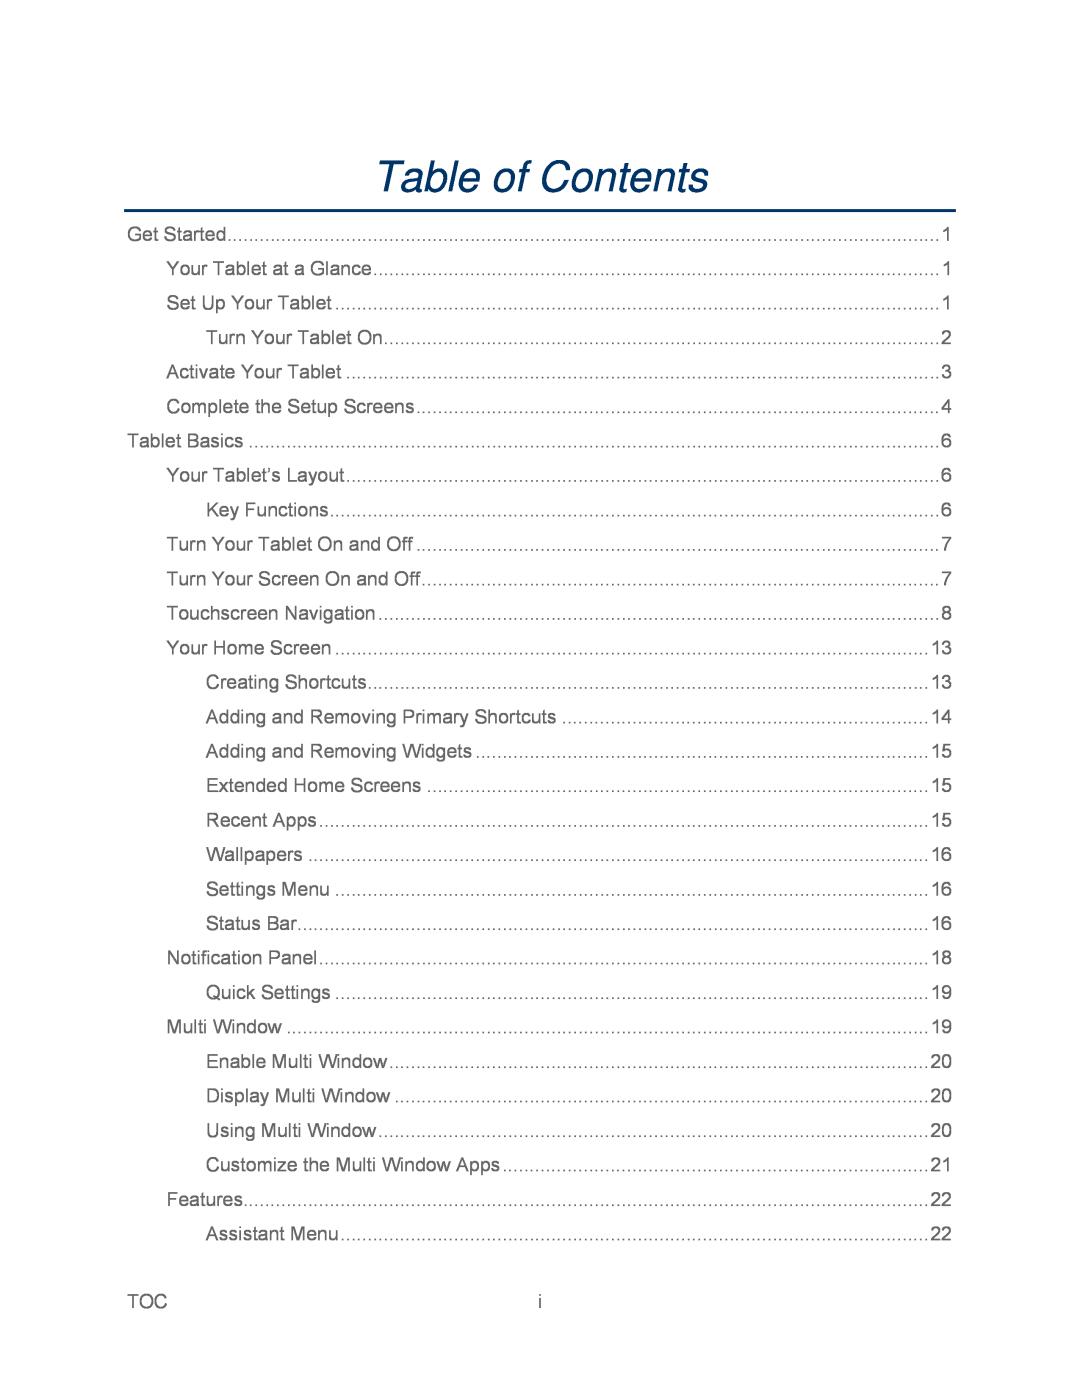 Table of Contents Galaxy Tab 3 7.0 Sprint